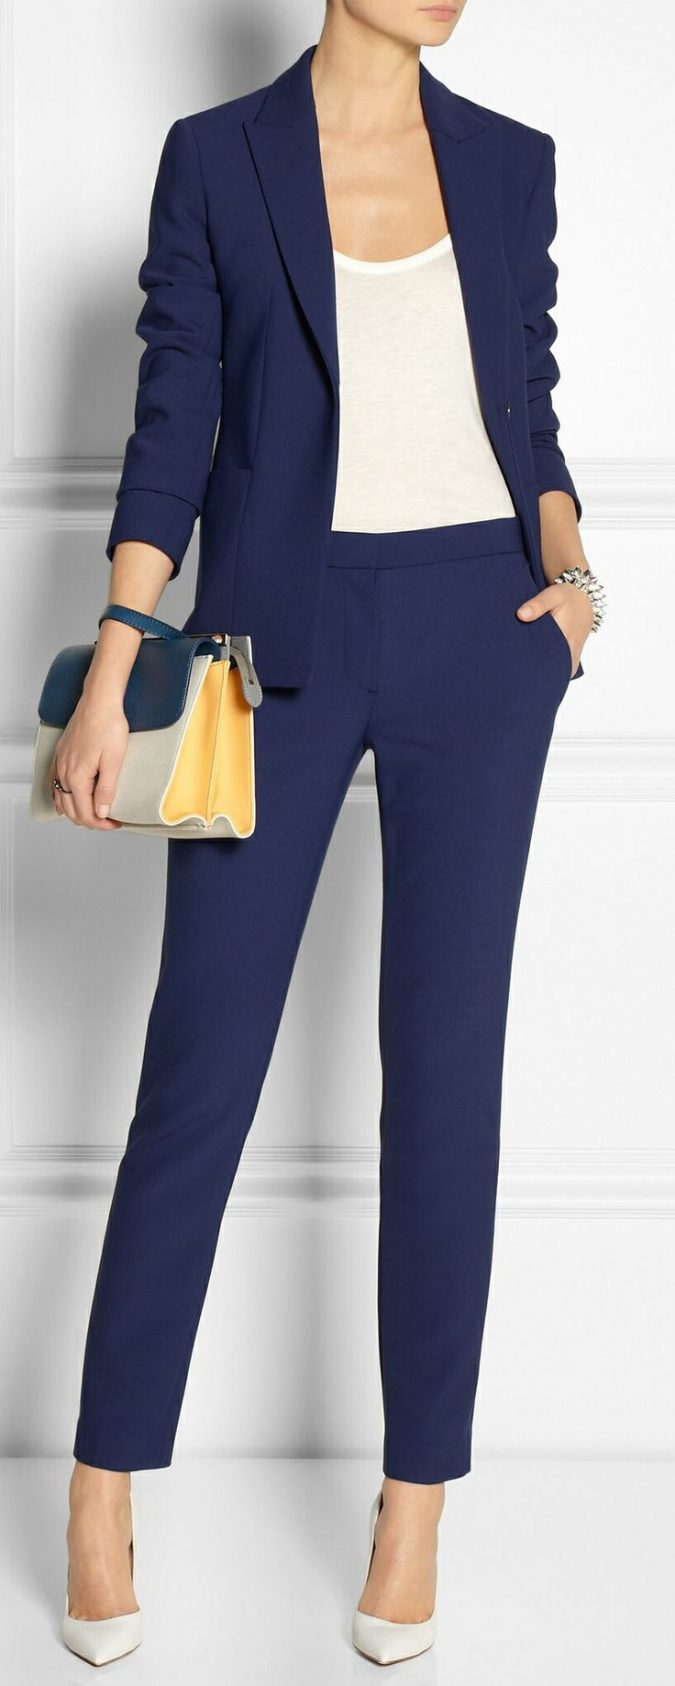 Colorful-Suit3-675x1686 25+ Elegant Work Outfit Ideas That Every Working Woman Should Have